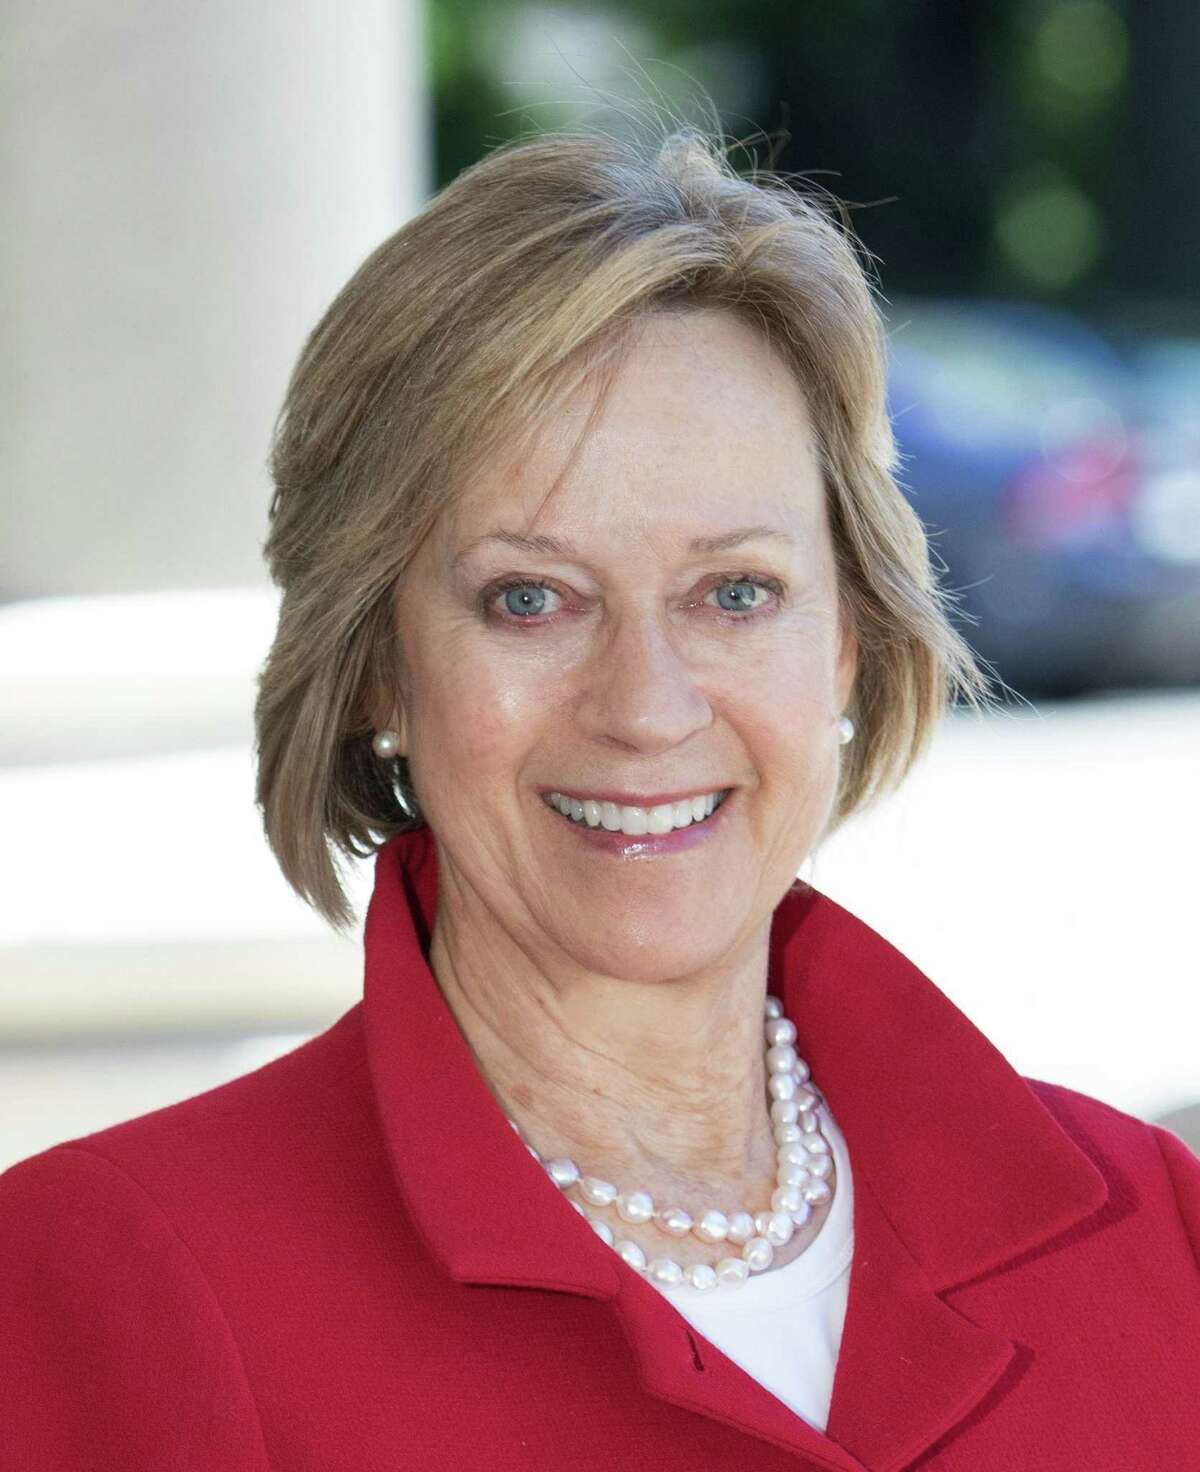 Seven-term state Rep. Terrie Wood of Darien is seeking the Republican nomination to run for secretary of the state in November. The primary is Tuesday.